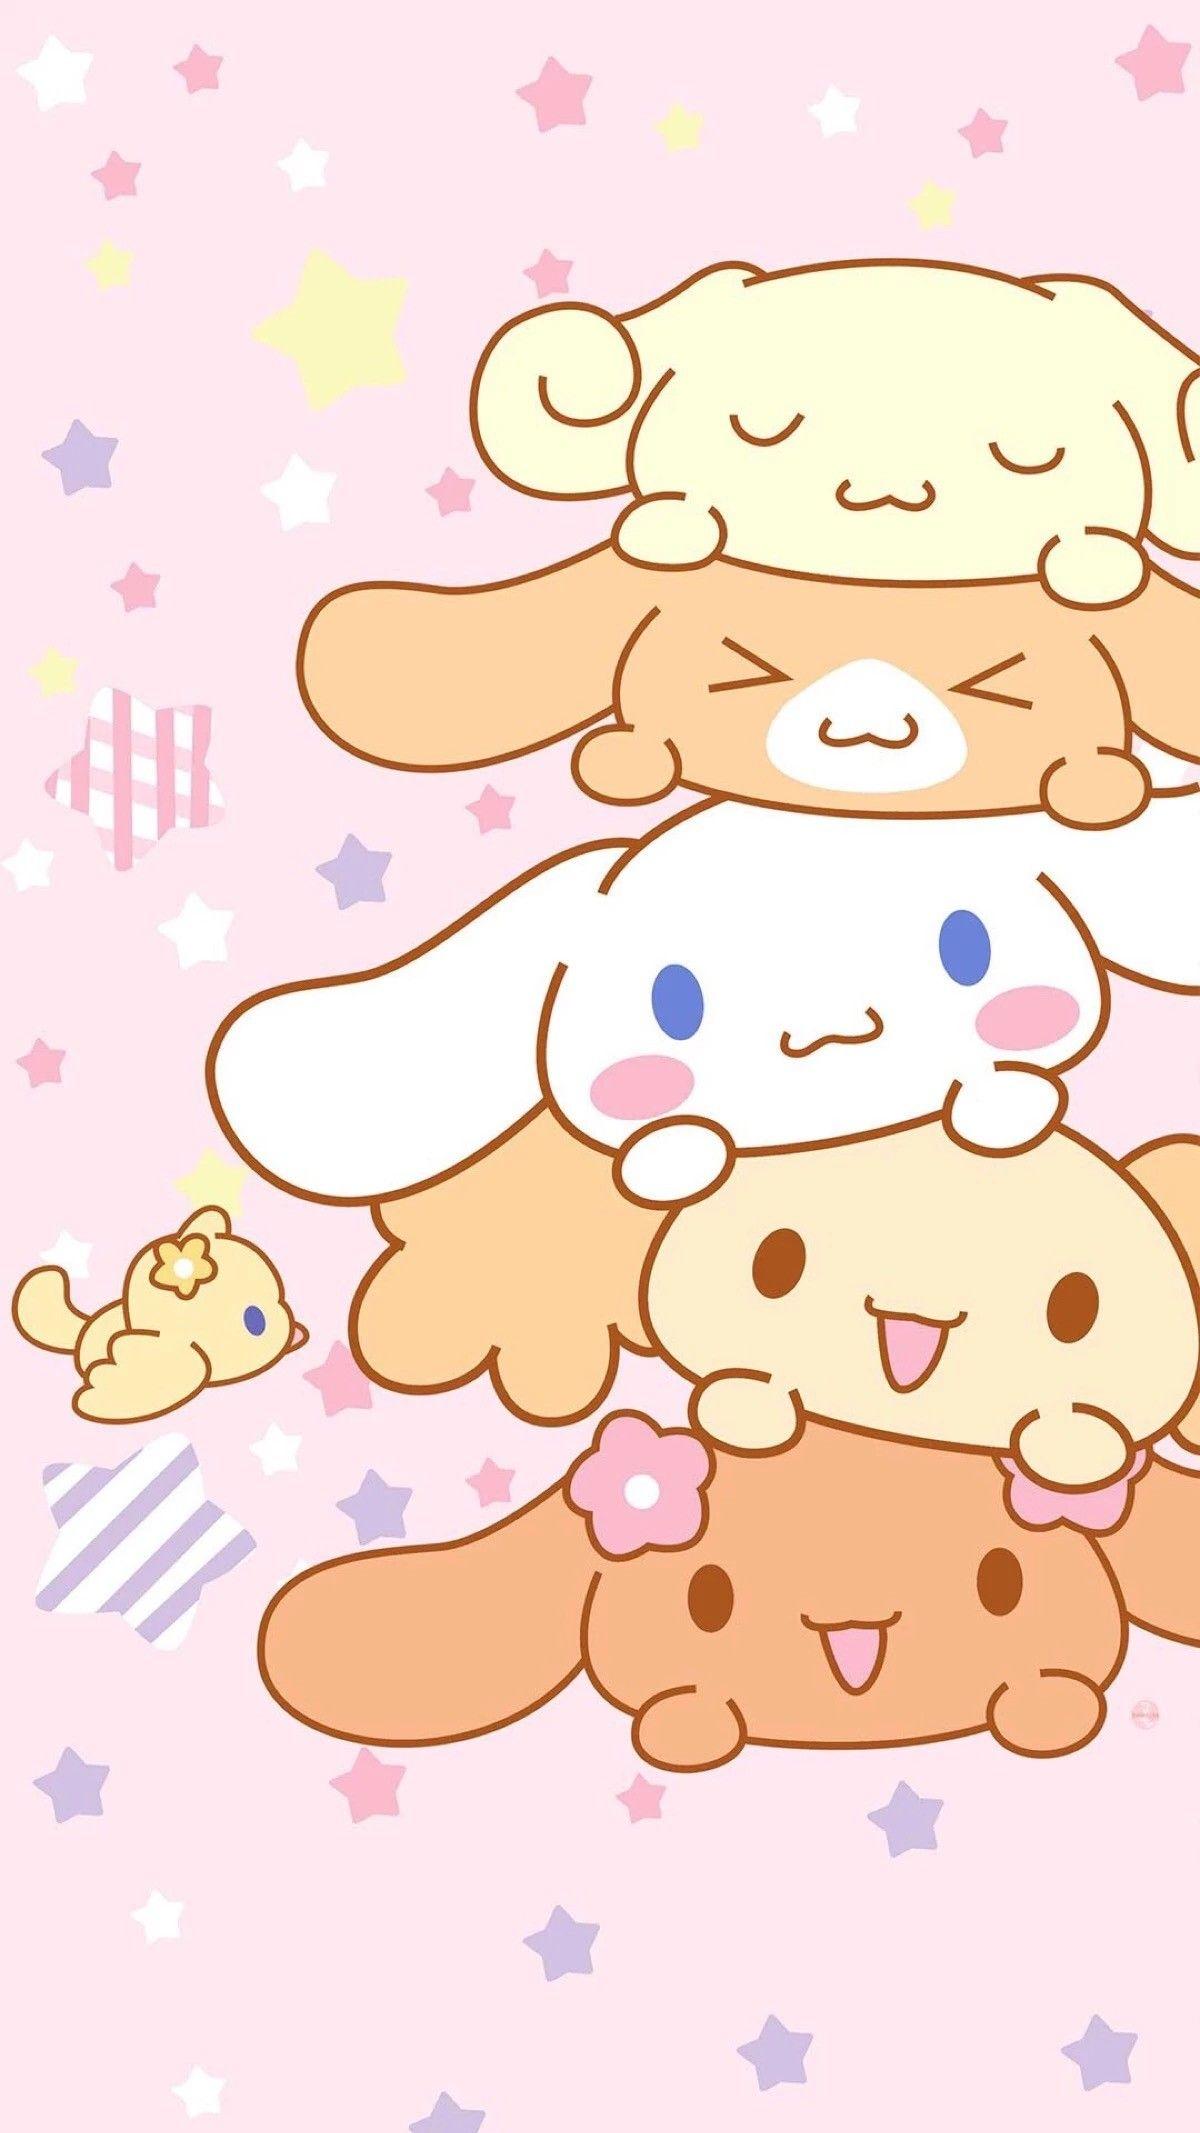 Sanrio Pom Pom Purin And Macaron Wallpapers - Wallpaper Cave